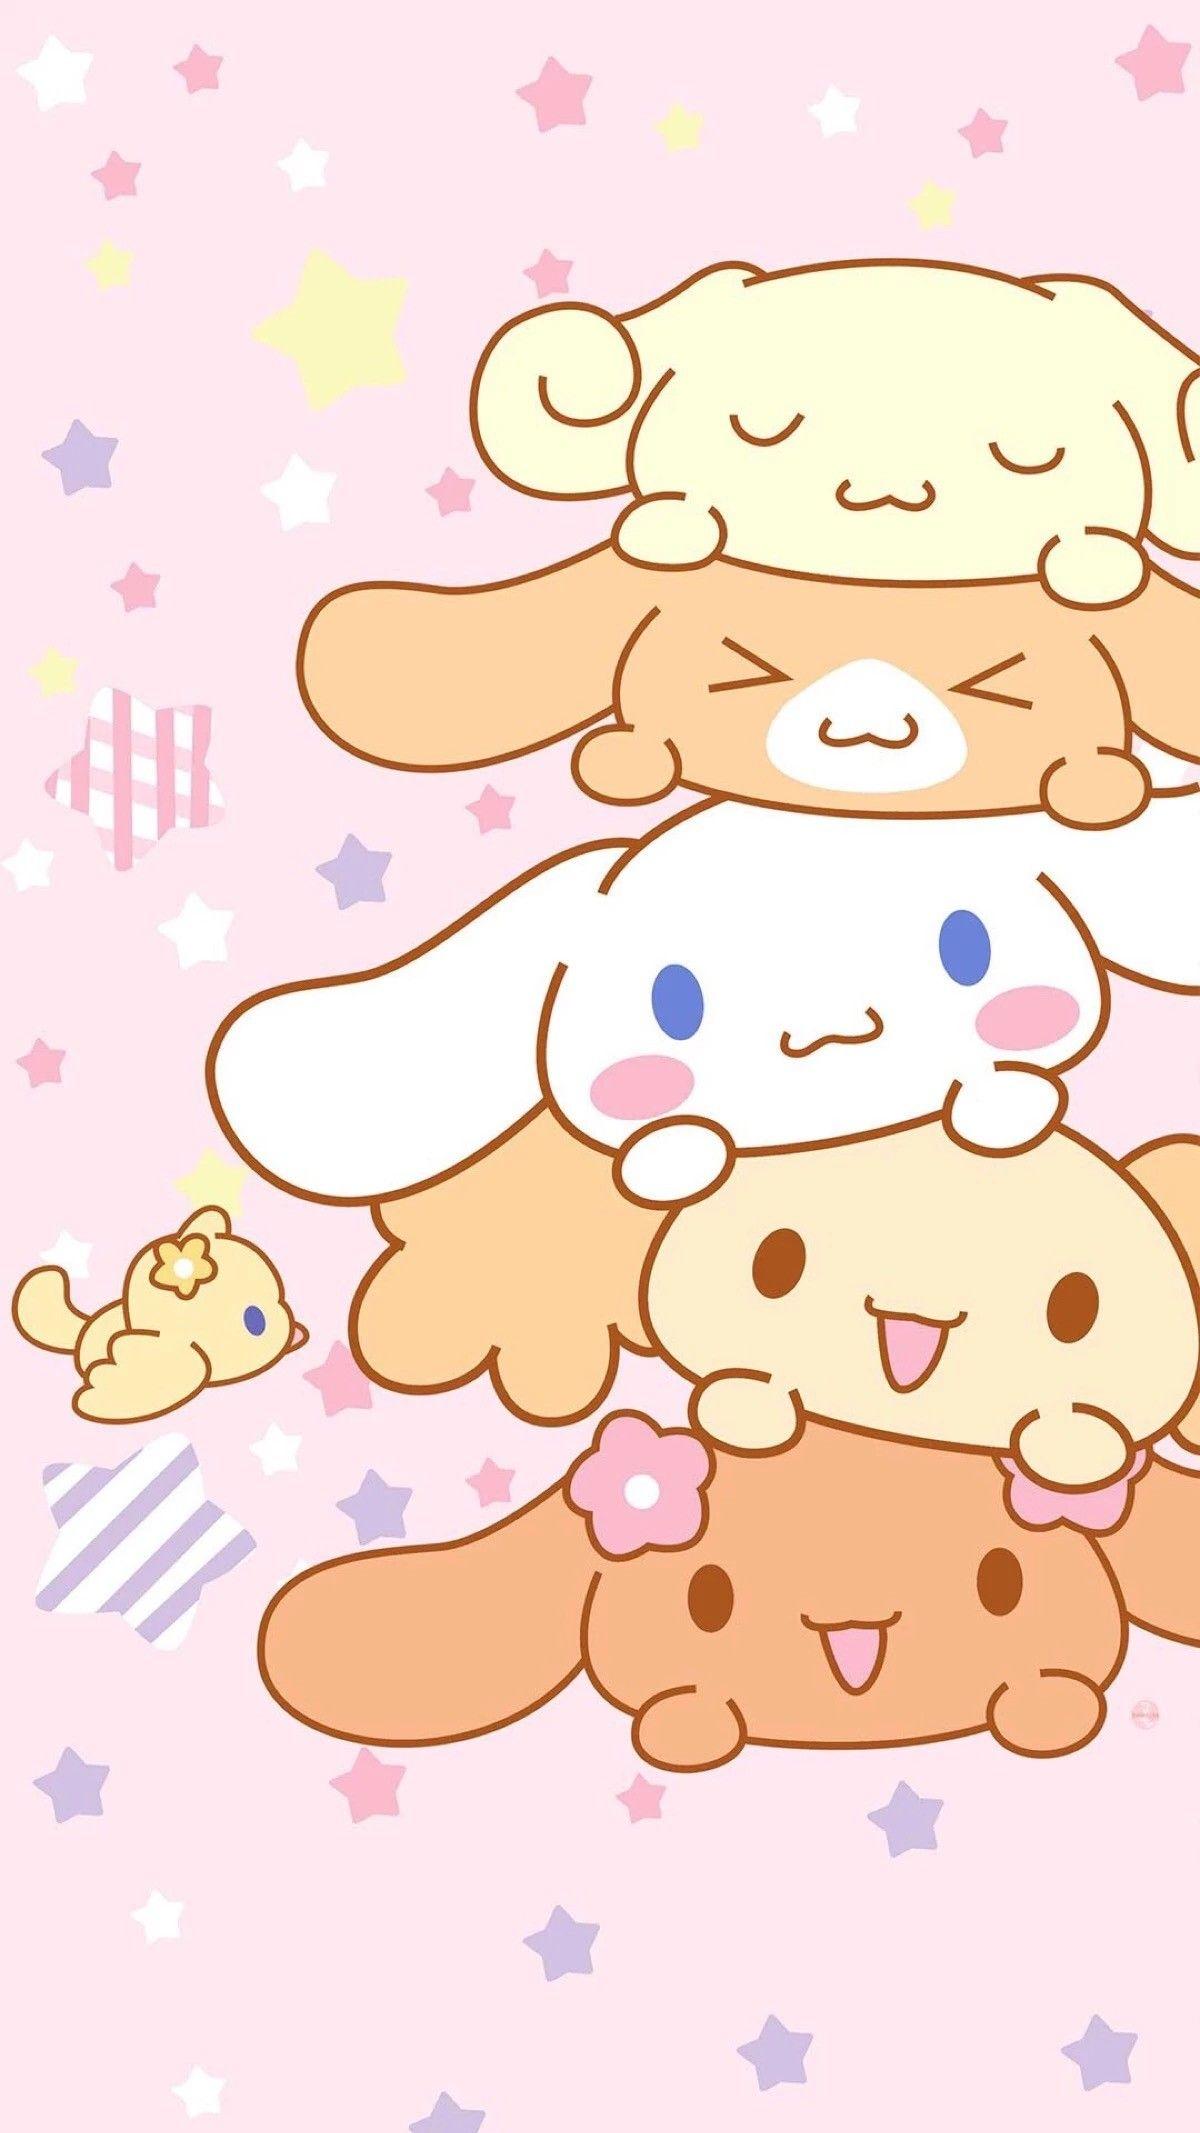 Sanrio Pom Pom Purin And Macaron Wallpapers - Wallpaper Cave